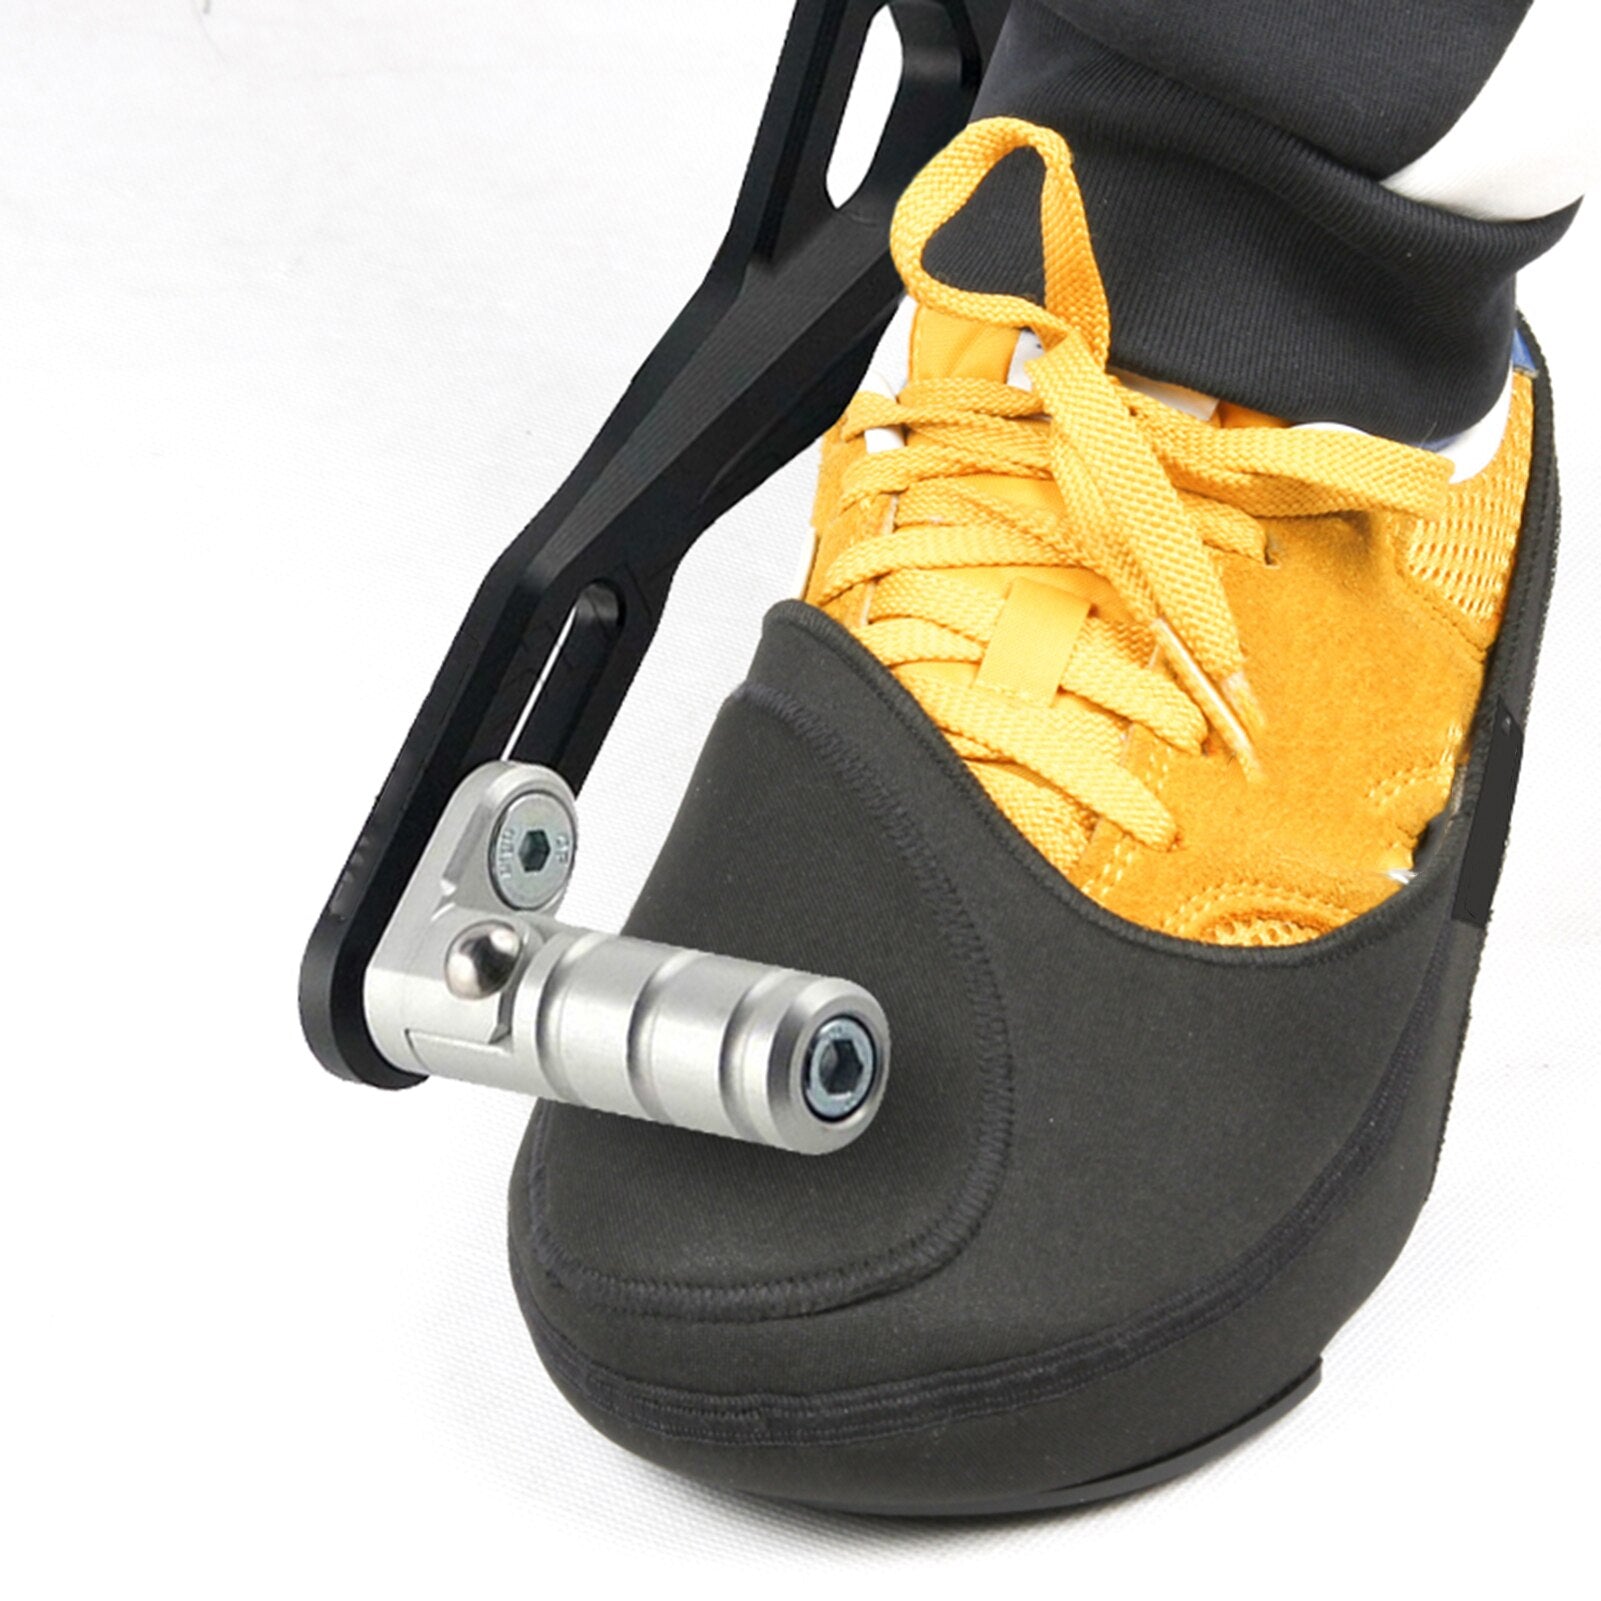 Motorcycle Gear Boot & Shifter Protector - Durable Motorcycle Shoe Gua